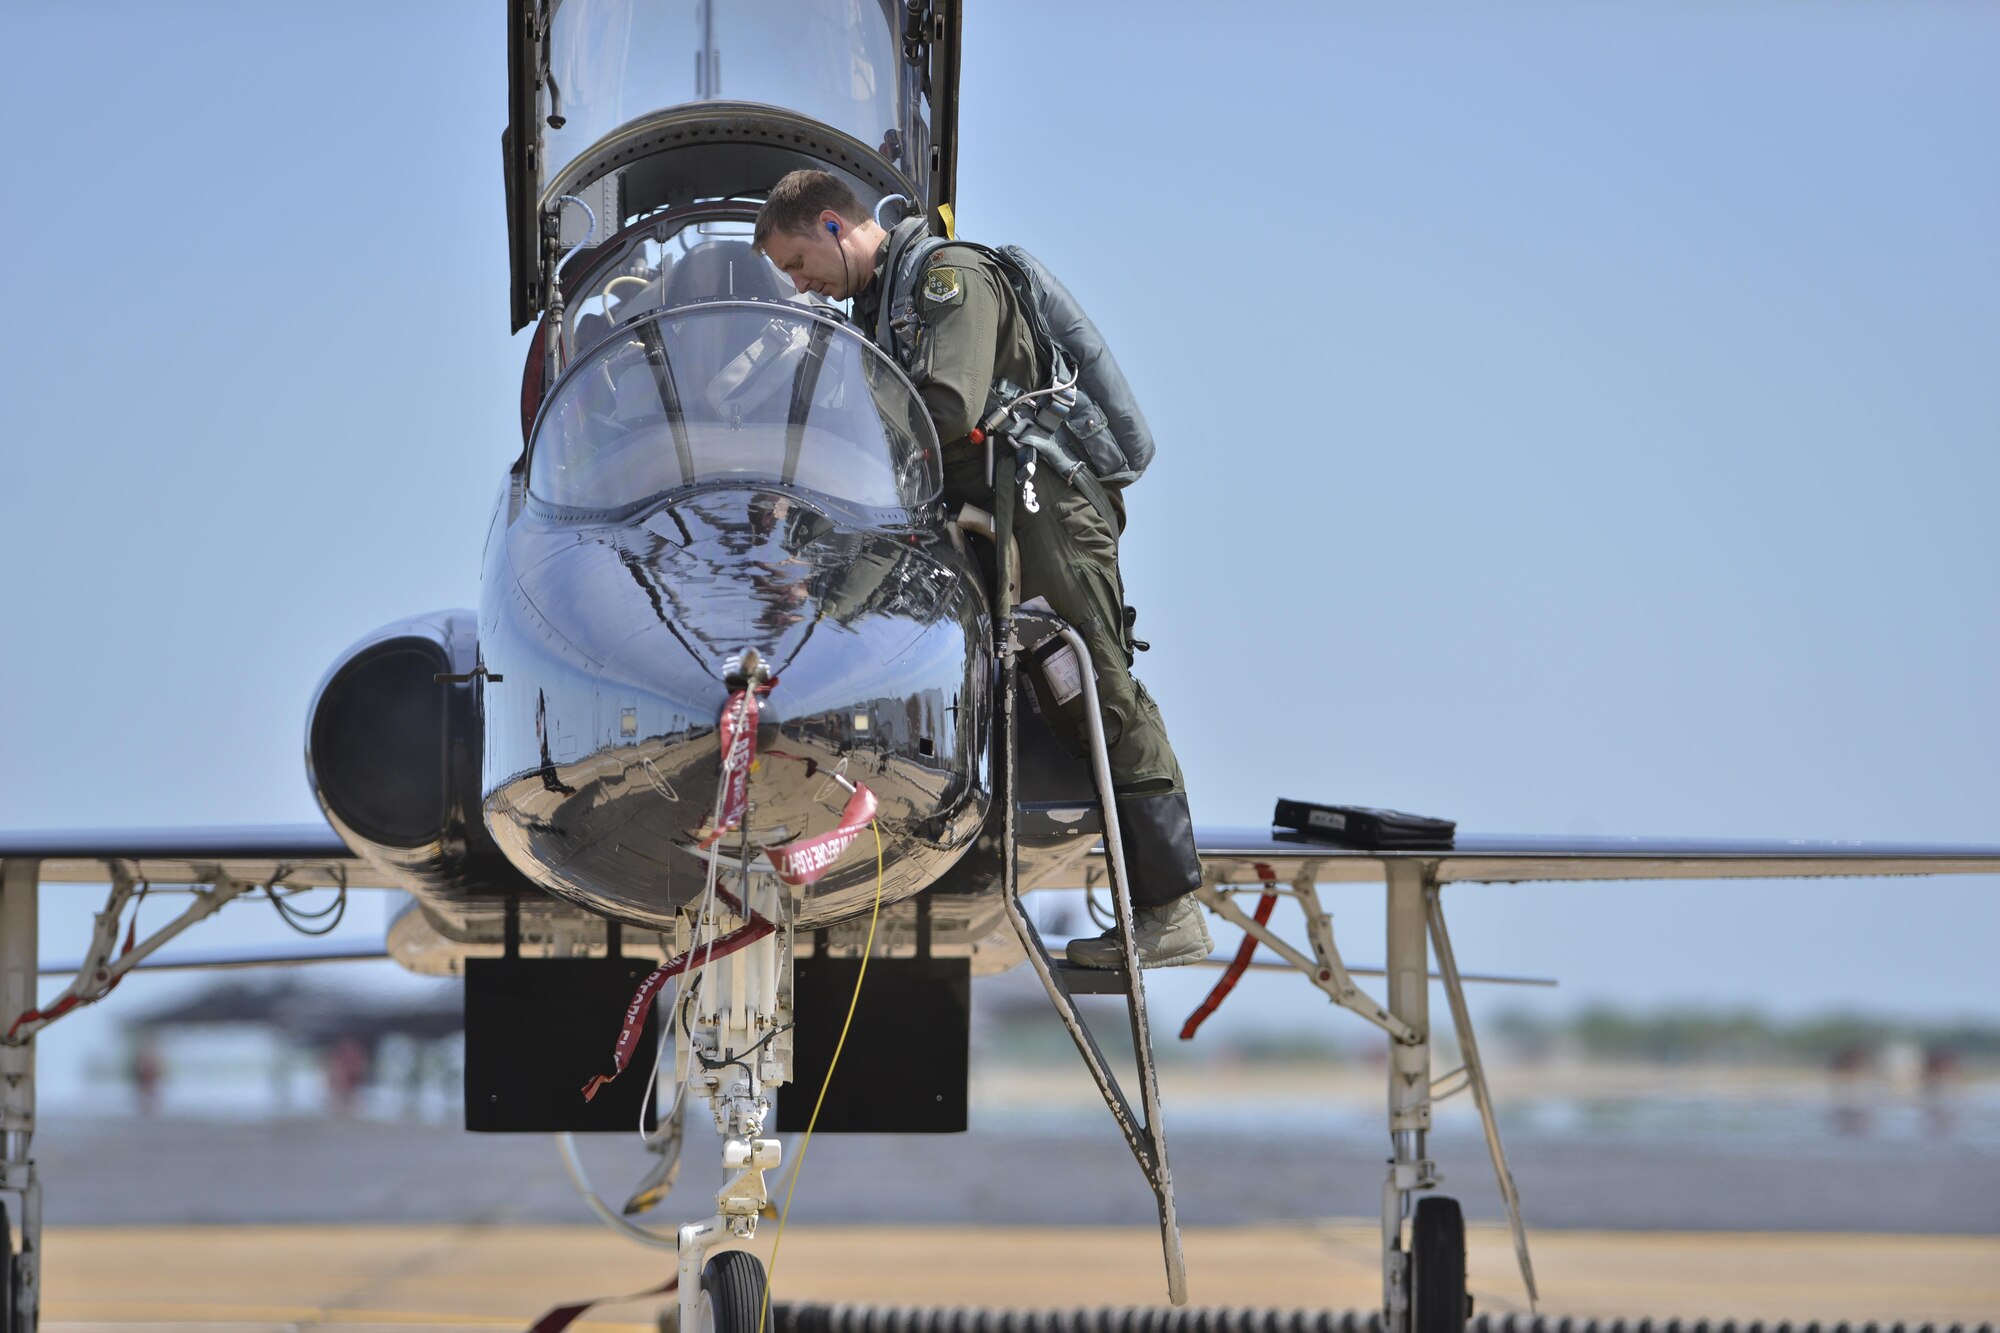 U.S. Air Force Maj. Nathaniel Lightfoot, 71st Fighter Training Squadron aggressor pilot, deplanes after a combat training mission during ATLANTICTRIDENT 17 at Joint Base Langley-Eustis, Va., April 18, 2016. The aggressors are the aerial adversaries of the exercise, which focuses on harnessing fifth-generation capabilities with fourth generation fighters from partnering nations. (U.S. Air Force photo/Staff Sgt. Natasha Stannard)